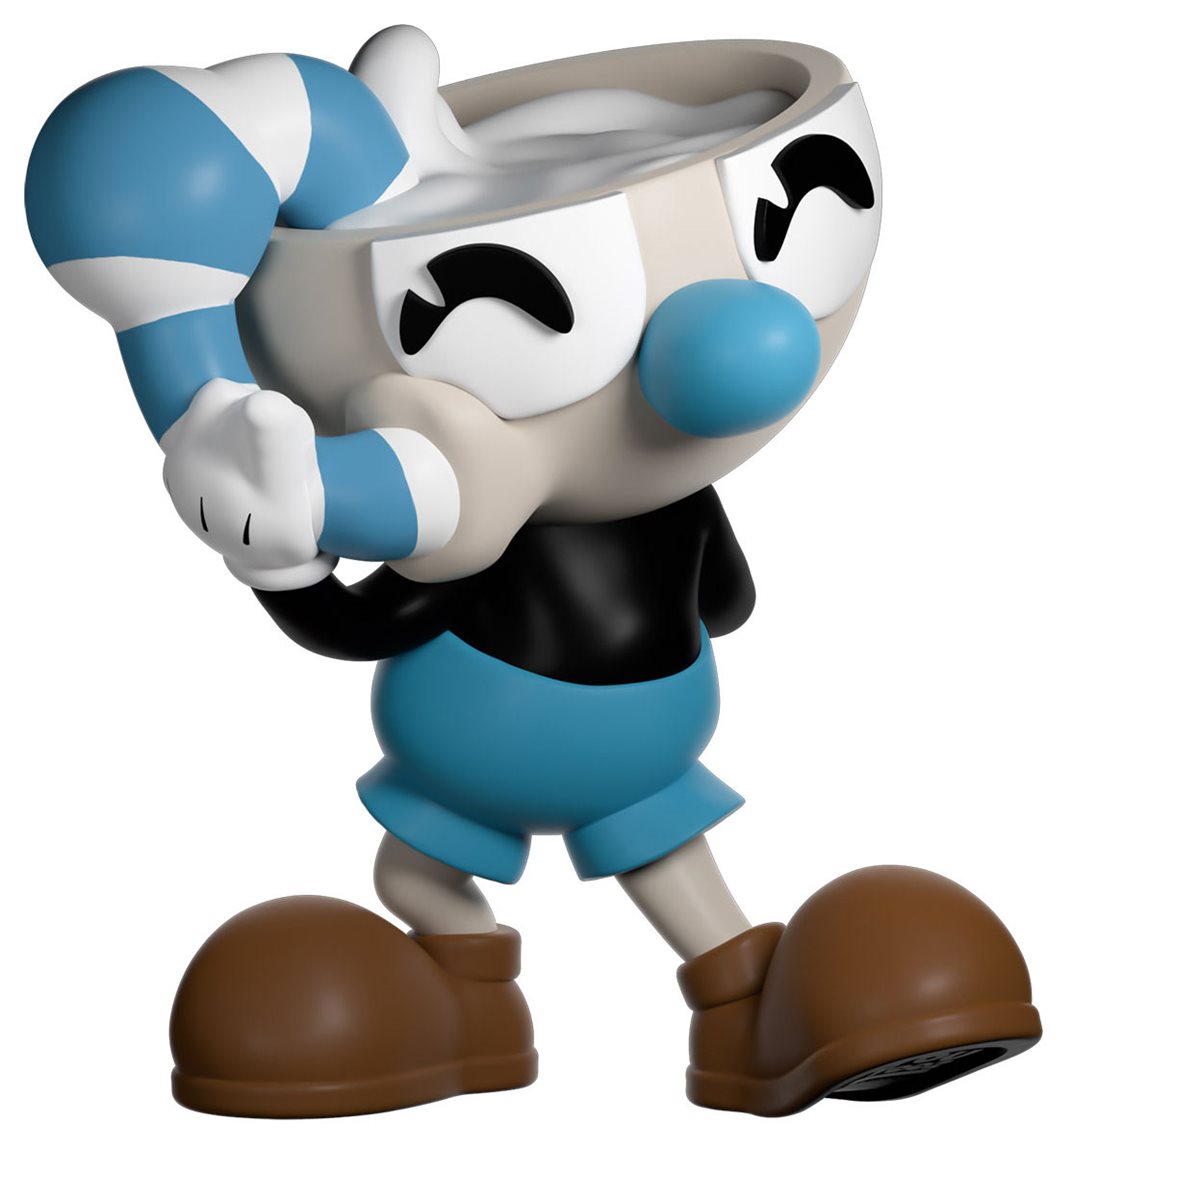 King Dice – Youtooz Collectibles